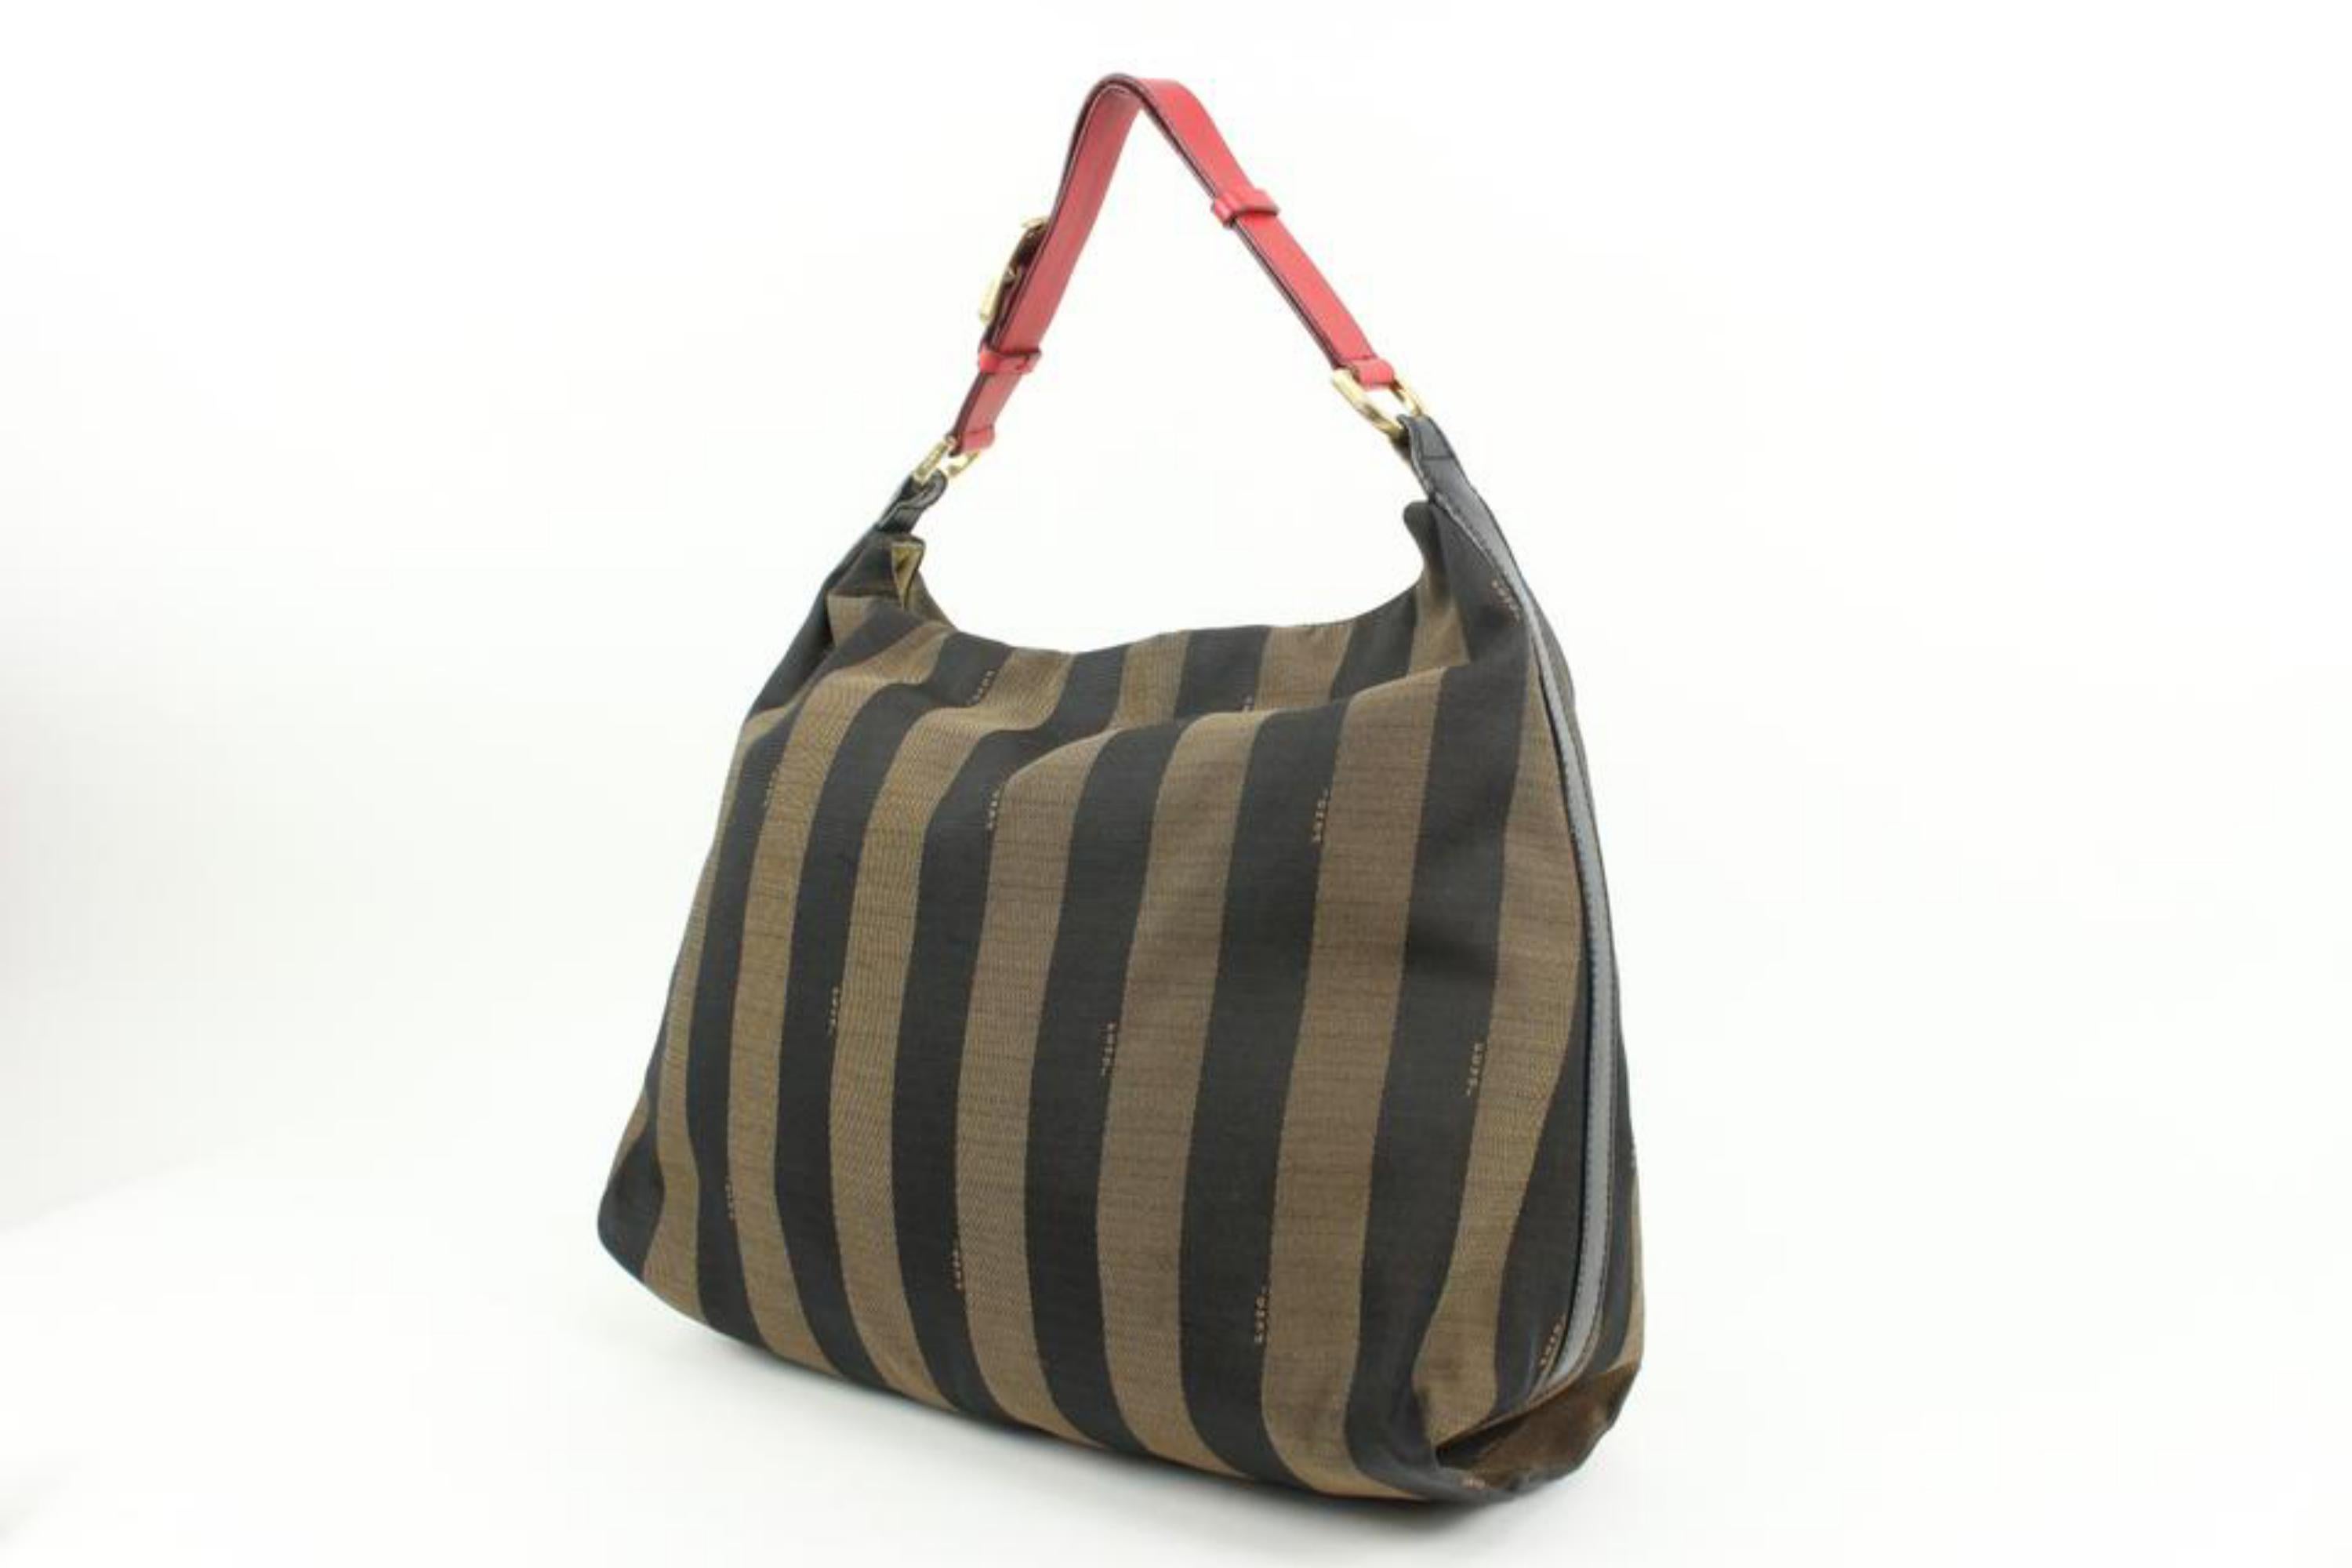 Fendi 8BR653 Tobacco Pequin Stripe Large Hobo Bag 67f38s
Date Code/Serial Number: 
Made In: Italy
Measurements: Length:  18